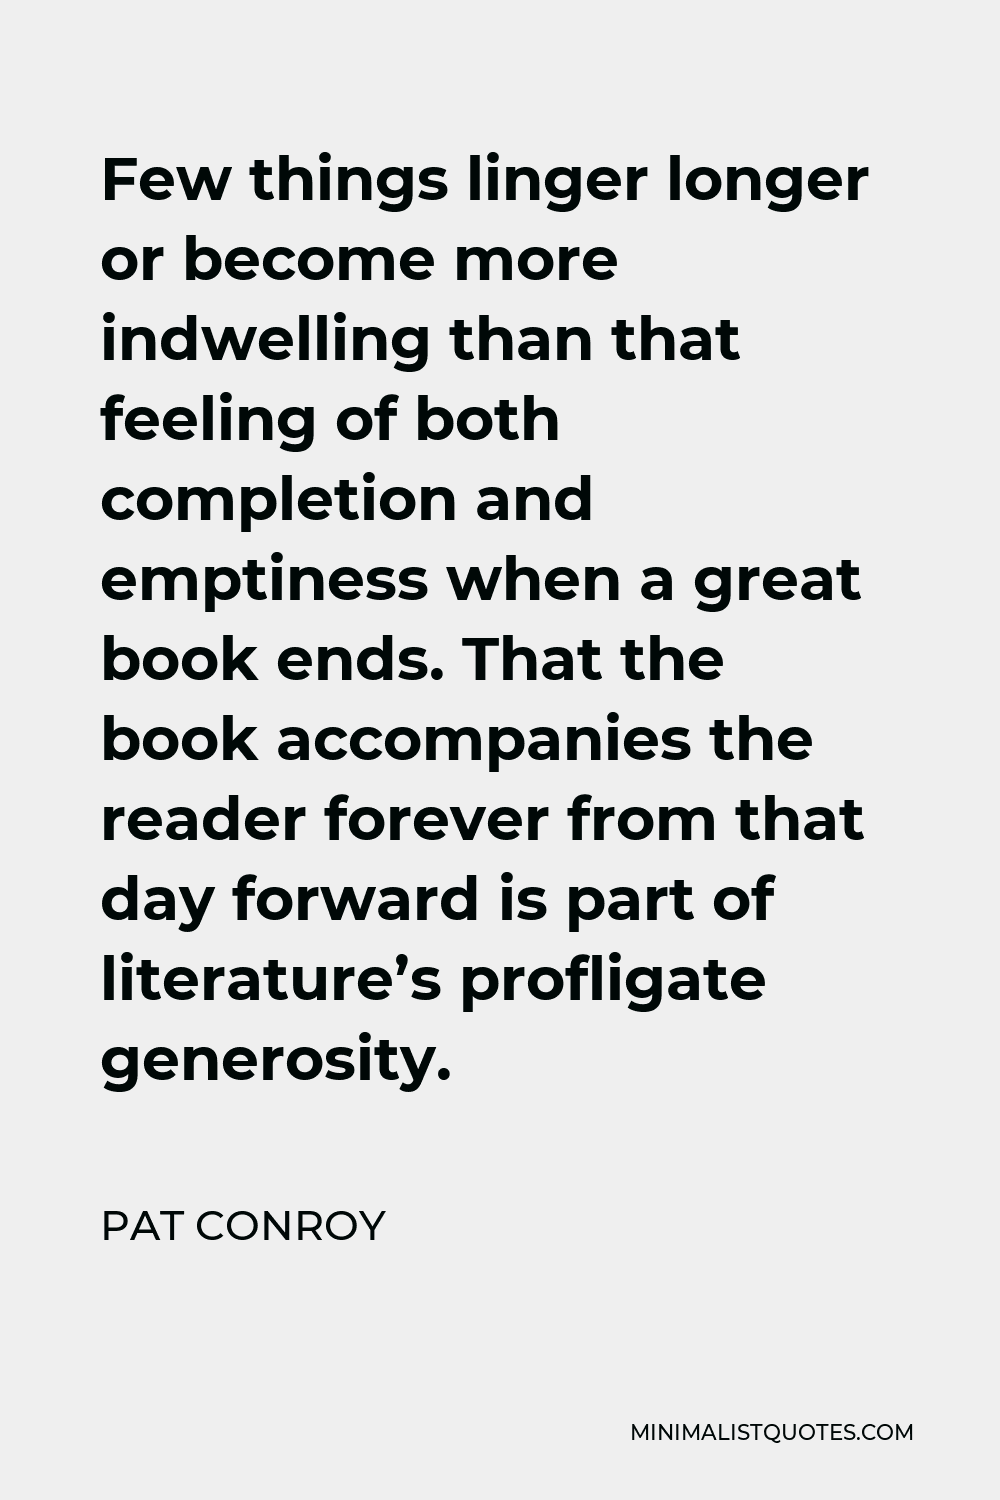 Pat Conroy Quote - Few things linger longer or become more indwelling than that feeling of both completion and emptiness when a great book ends. That the book accompanies the reader forever from that day forward is part of literature’s profligate generosity.